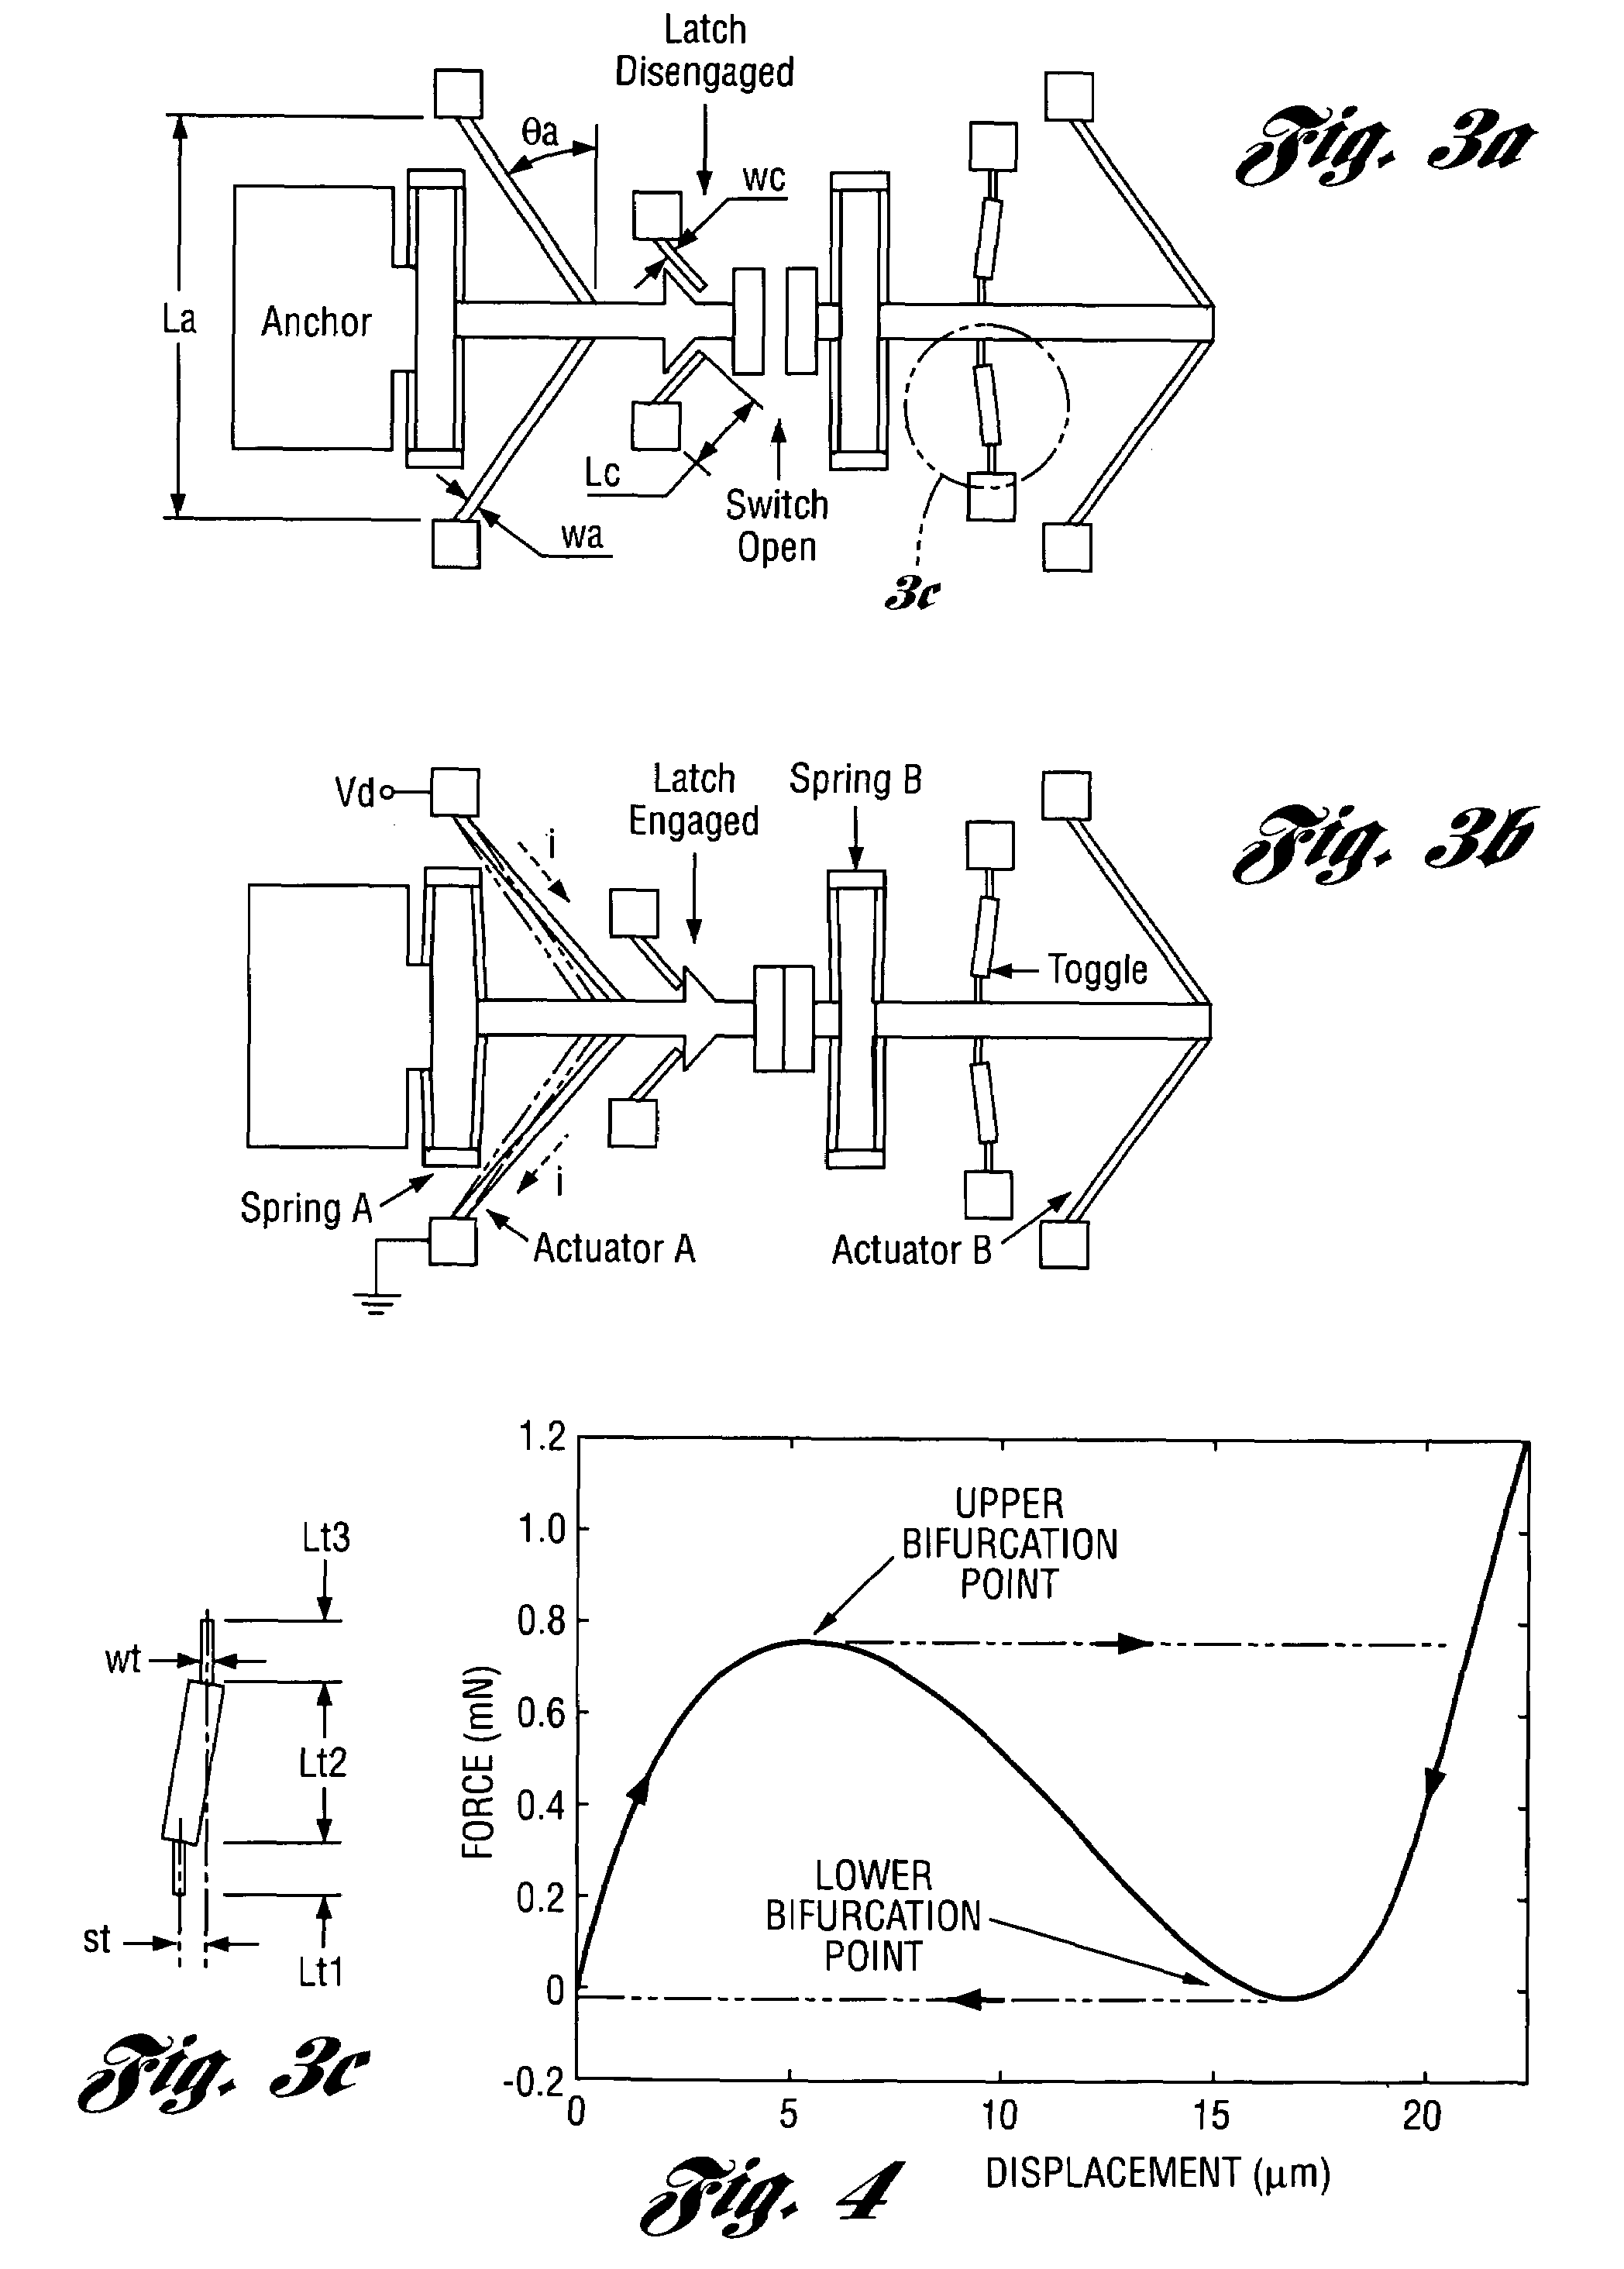 Mechanical self-reciprocating oscillator and mechanism and a method for establishing and maintaining regular back and forth movement of a micromachined device without the aid of any electronic components